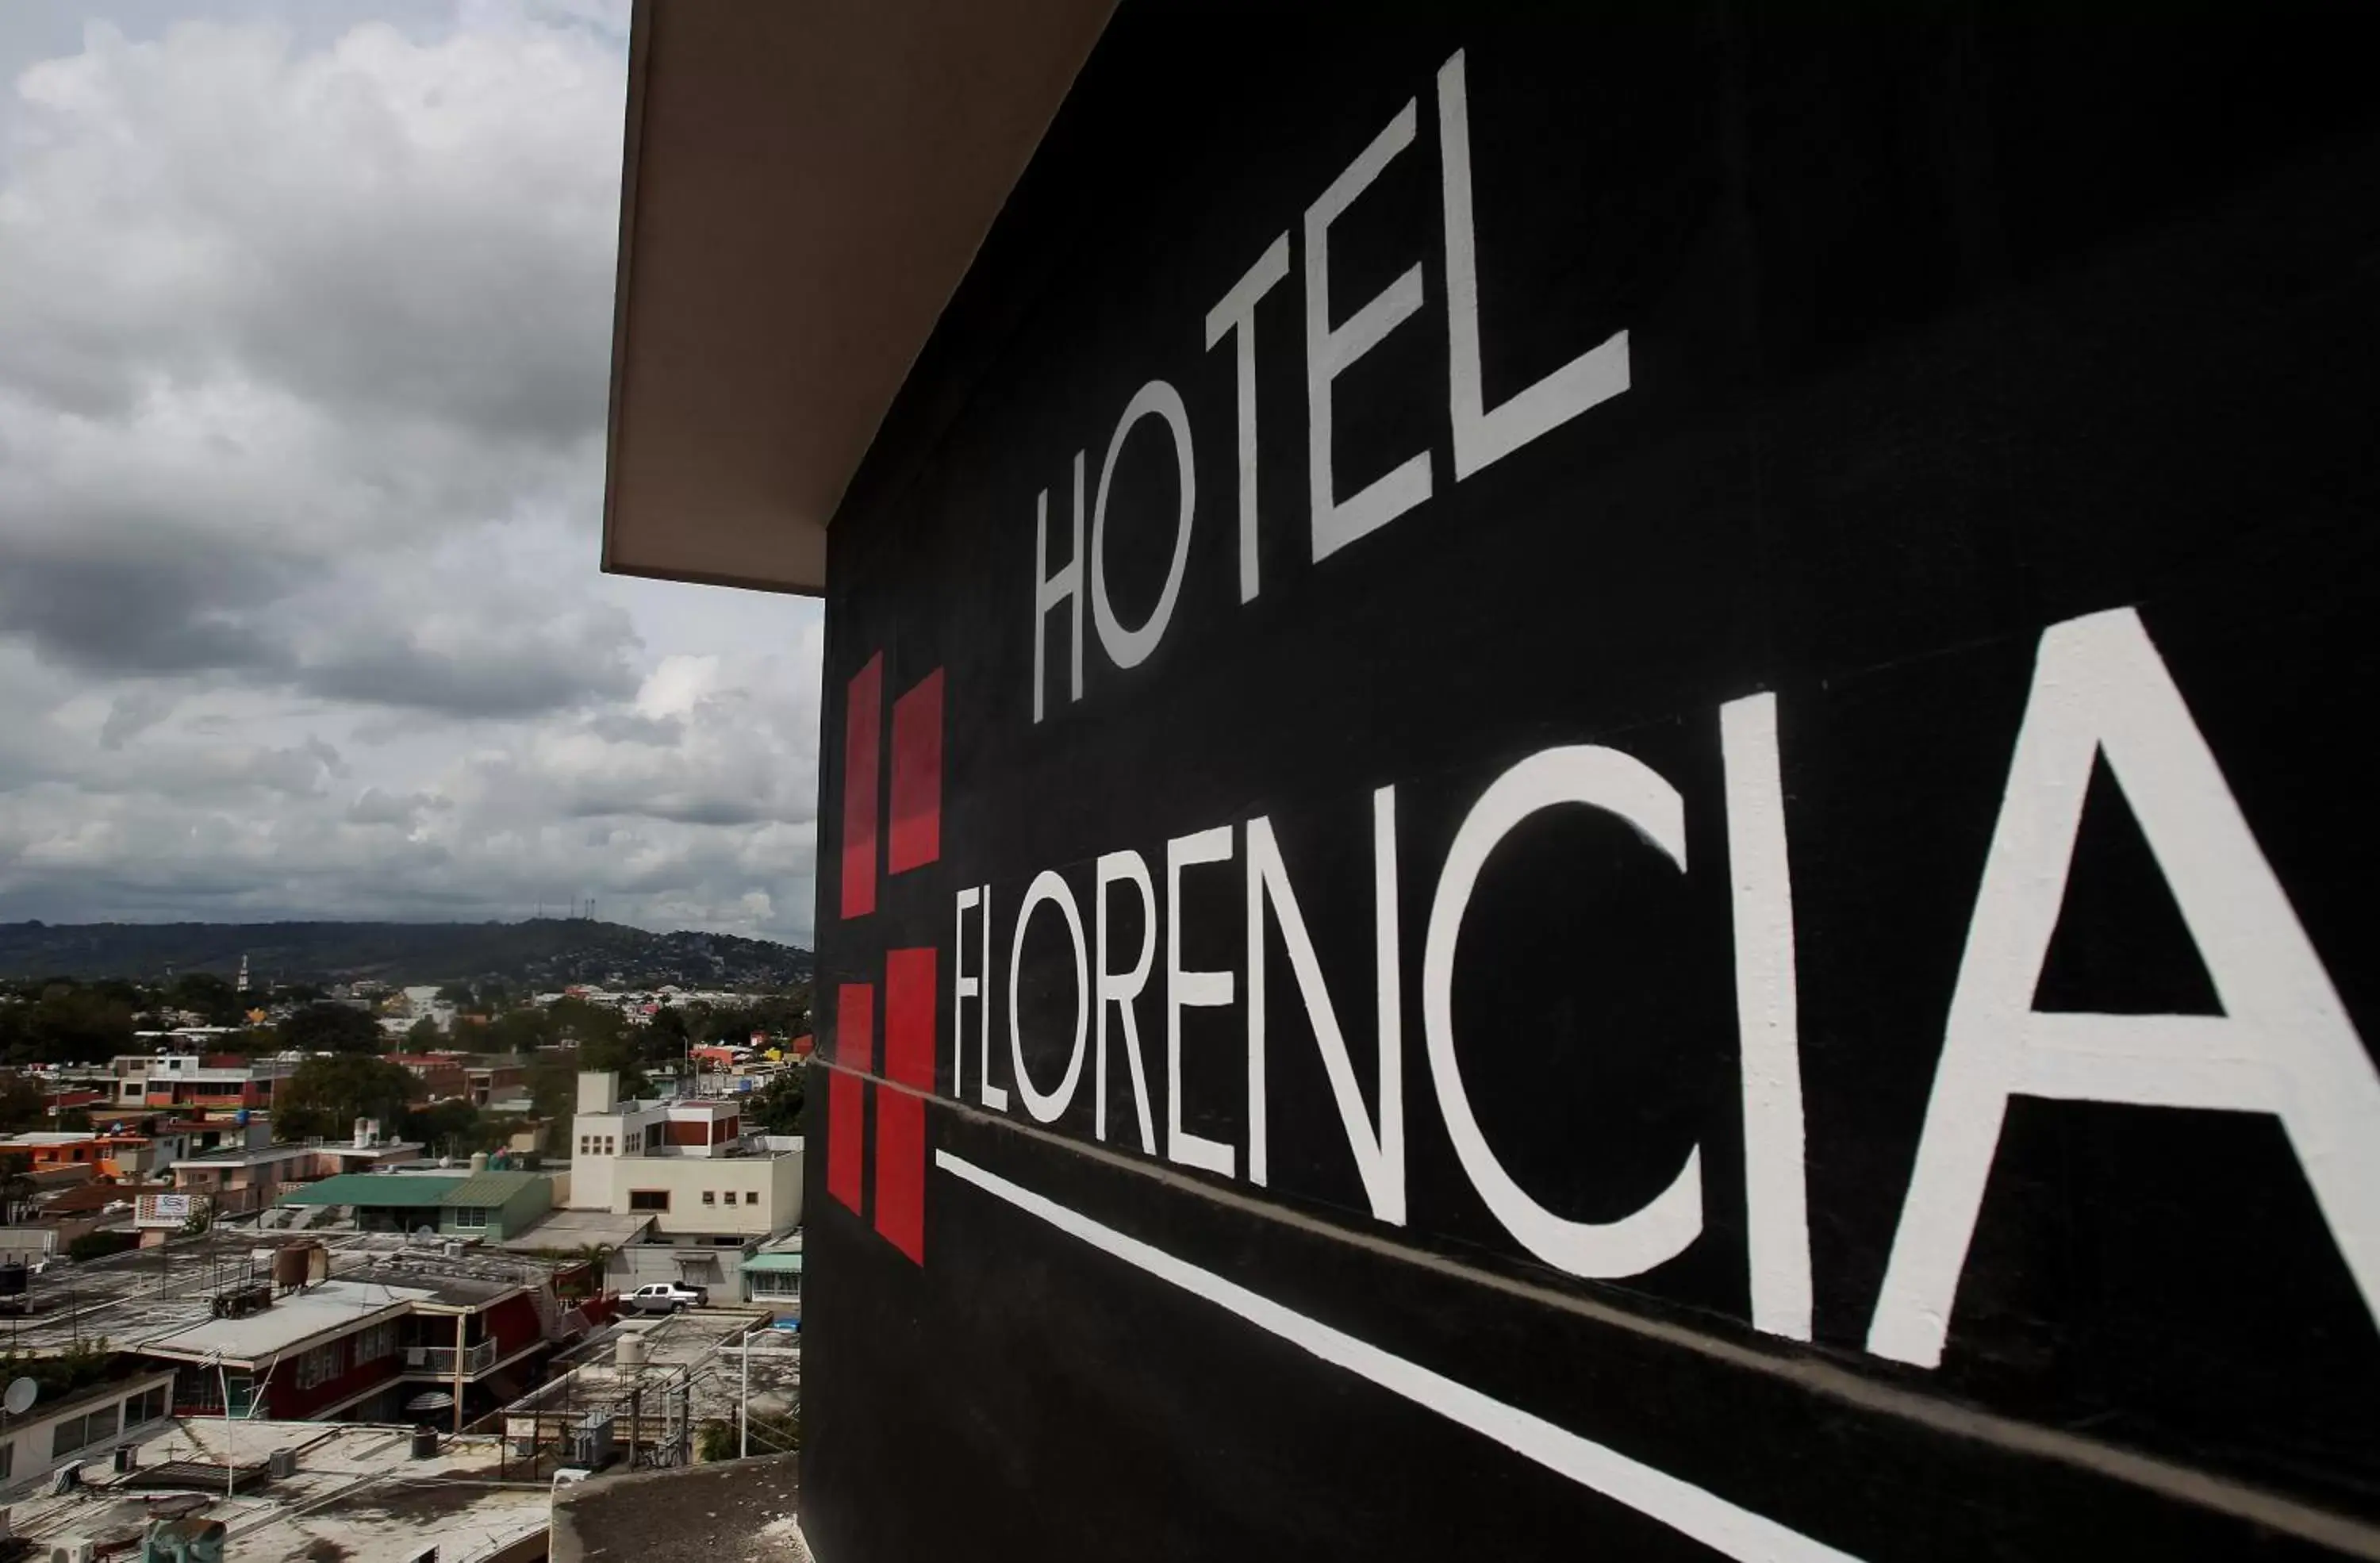 Property logo or sign, Property Logo/Sign in Hotel Florencia Poza Rica